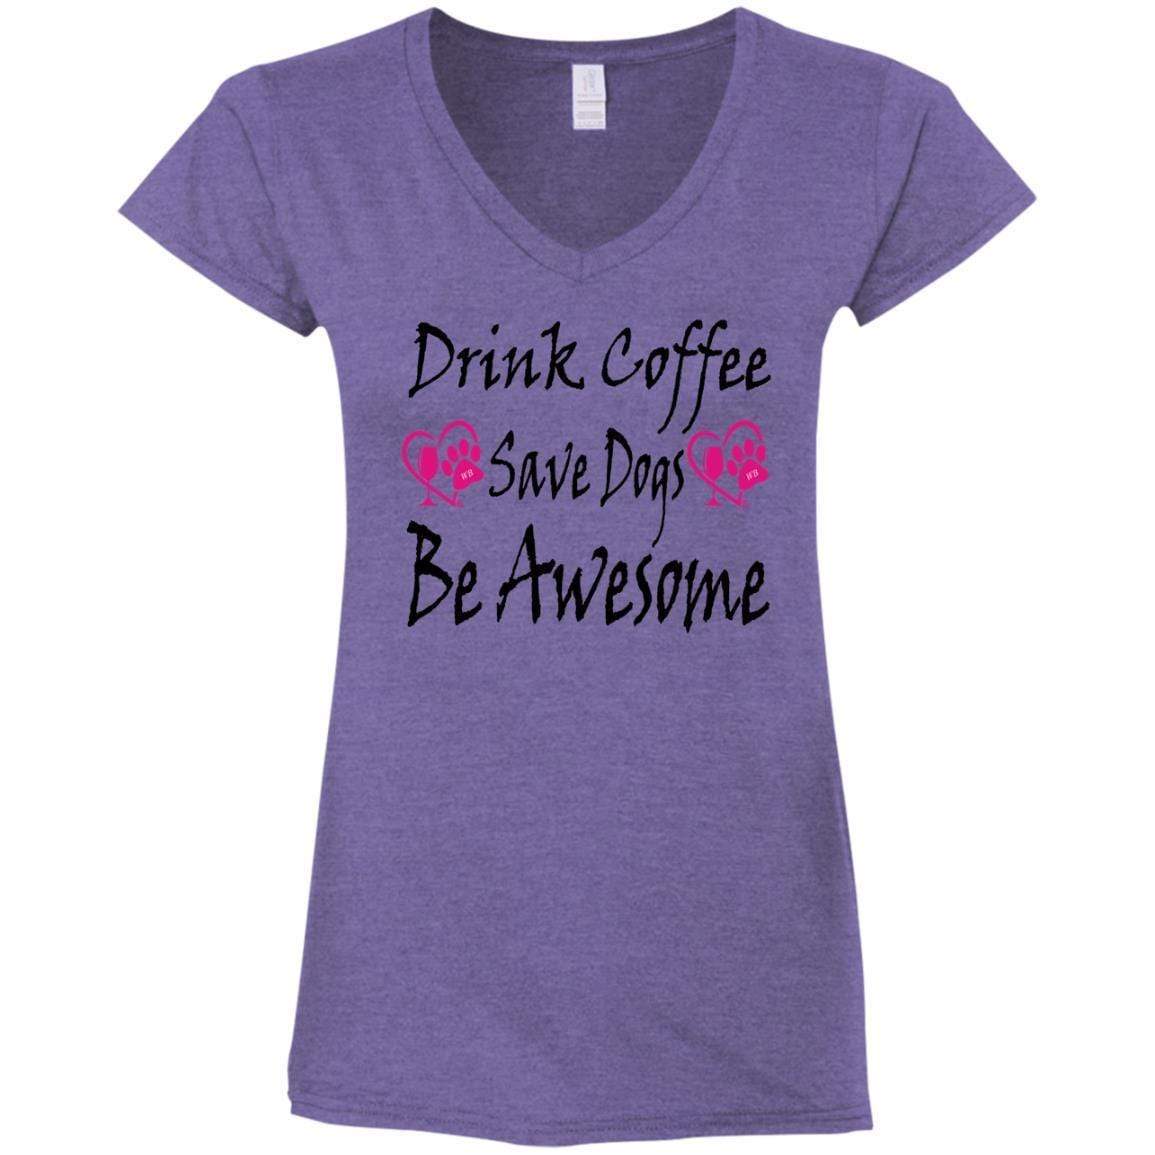 T-Shirts Heather Purple / S Winey Bitches Co "Drink Coffee Save Dogs Be Awesome" Ladies' Fitted Softstyle 4.5 oz V-Neck T-Shirt WineyBitchesCo